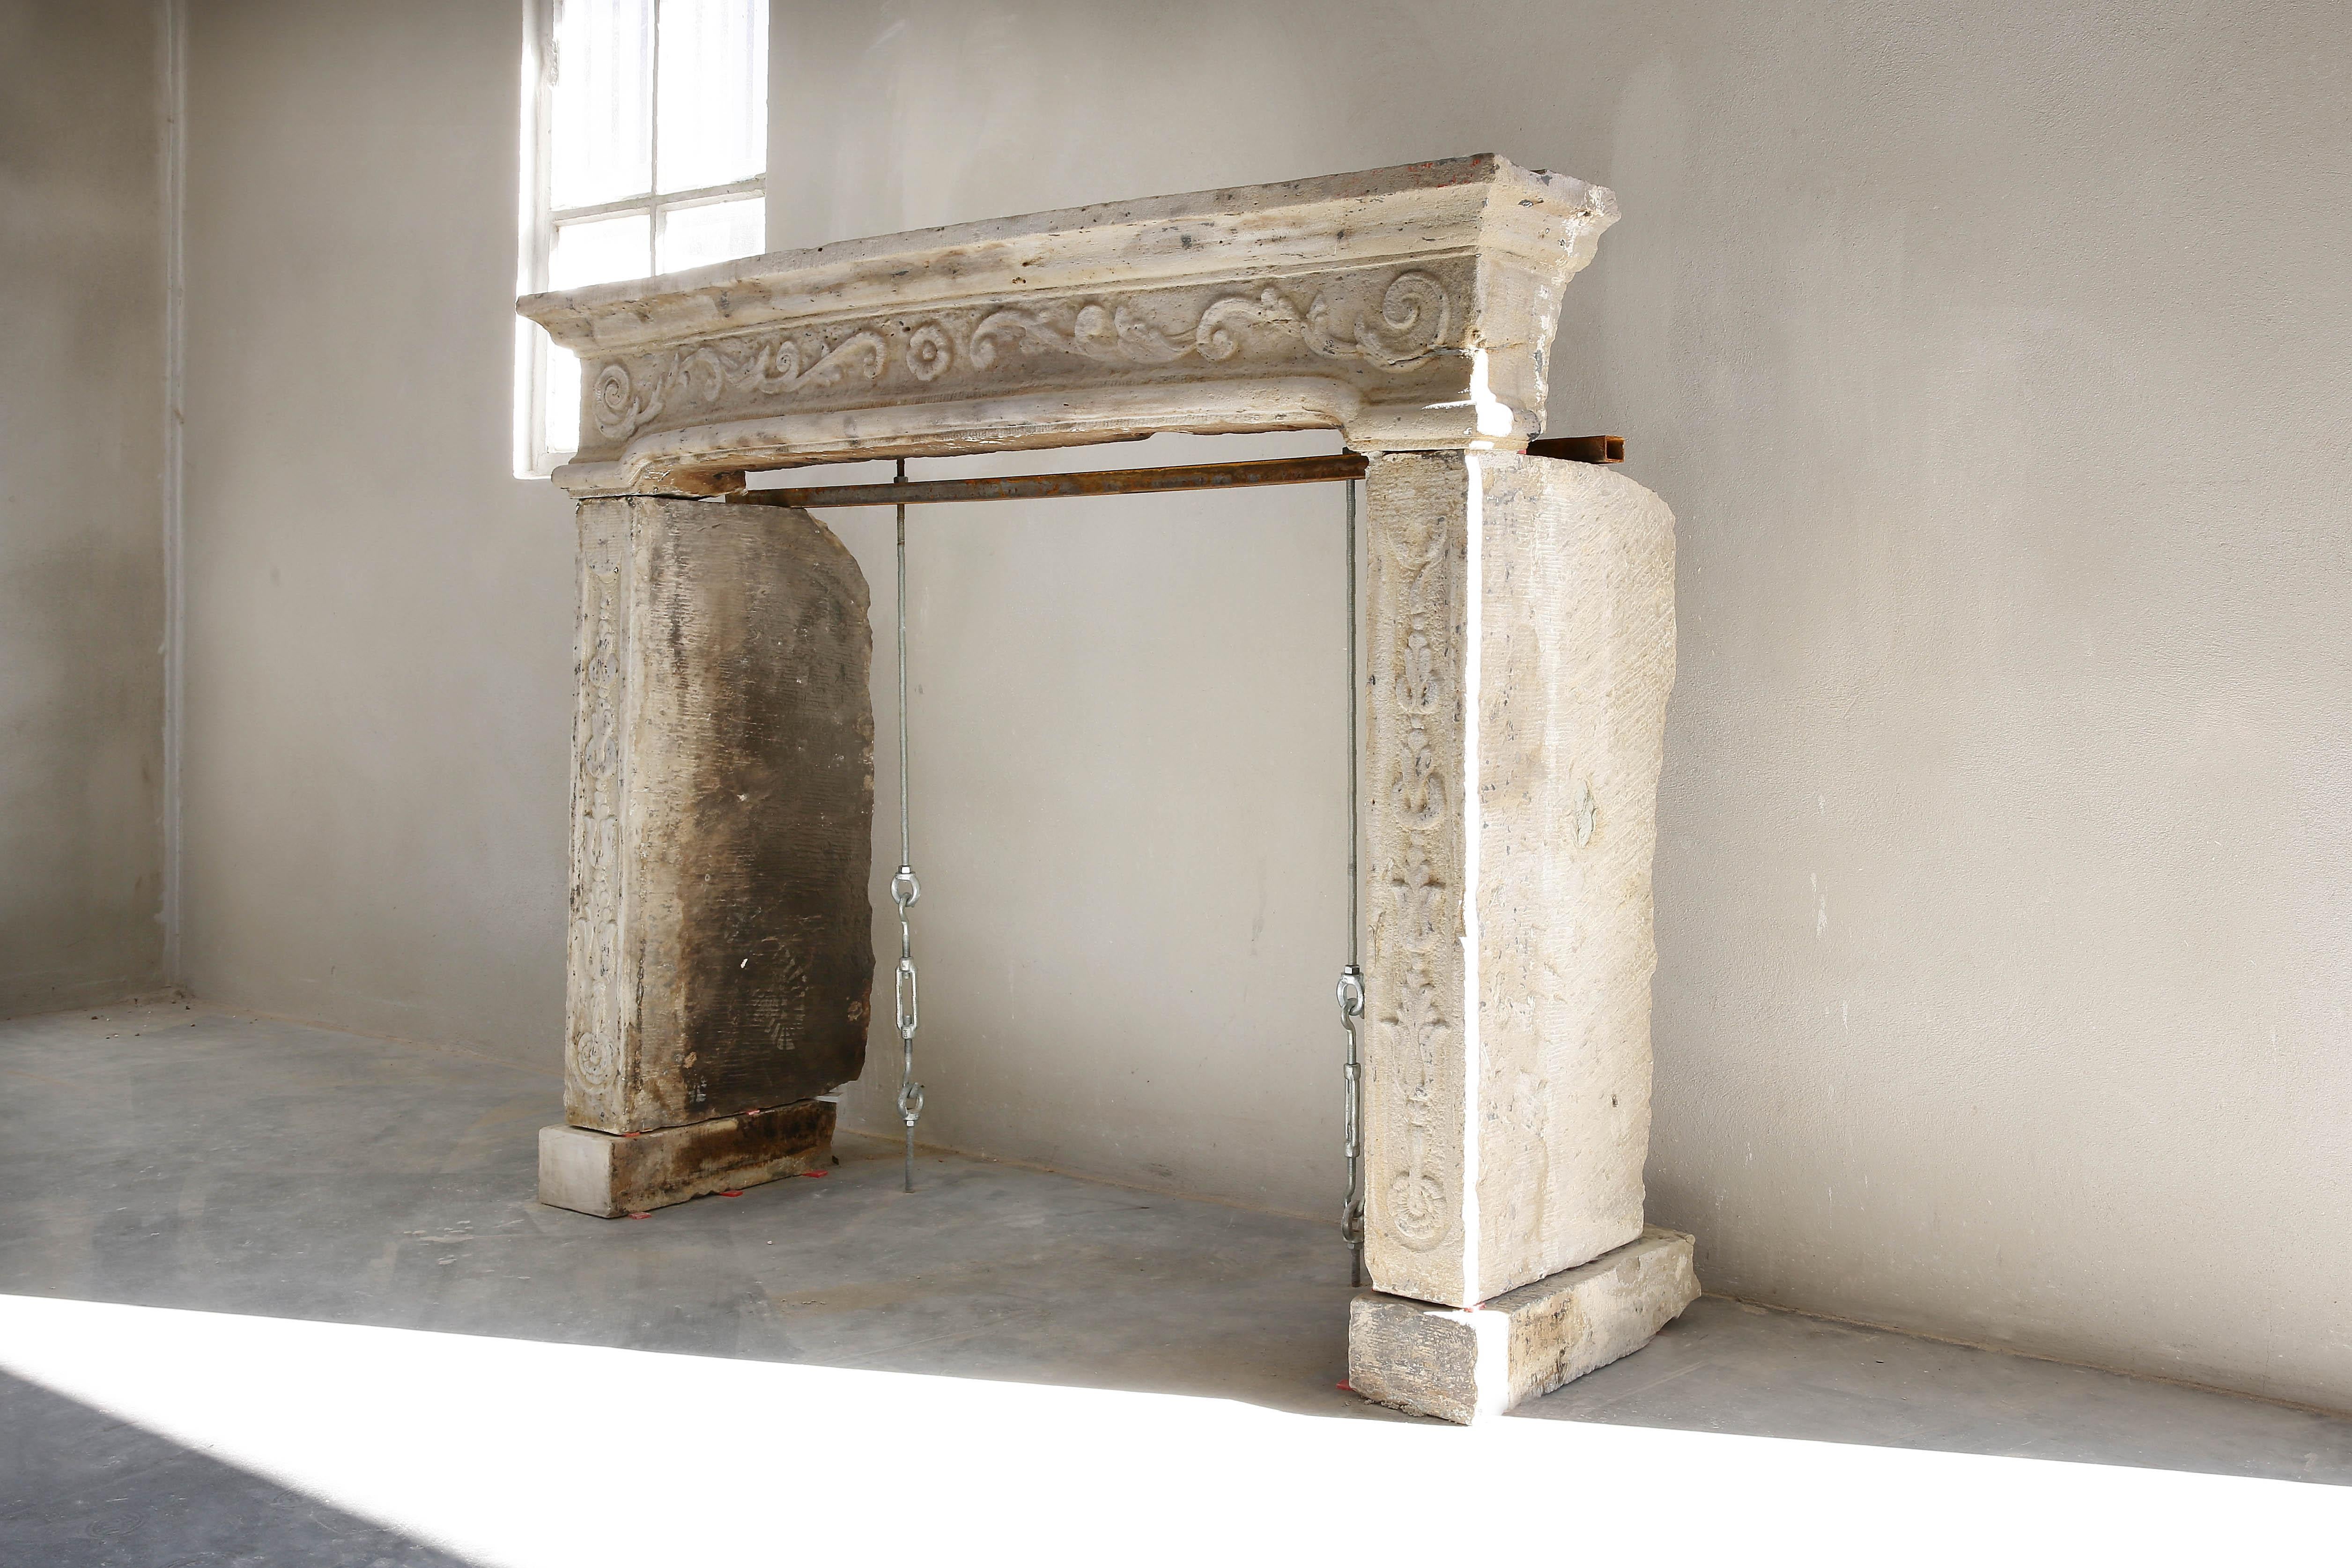 Rare exclusive antique fireplace made of French limestone. The beautiful shape and ornaments in the front part of the fireplace make this chimney very special! The mantelpiece dates from the 19th century and is in the style of Louis XIV.